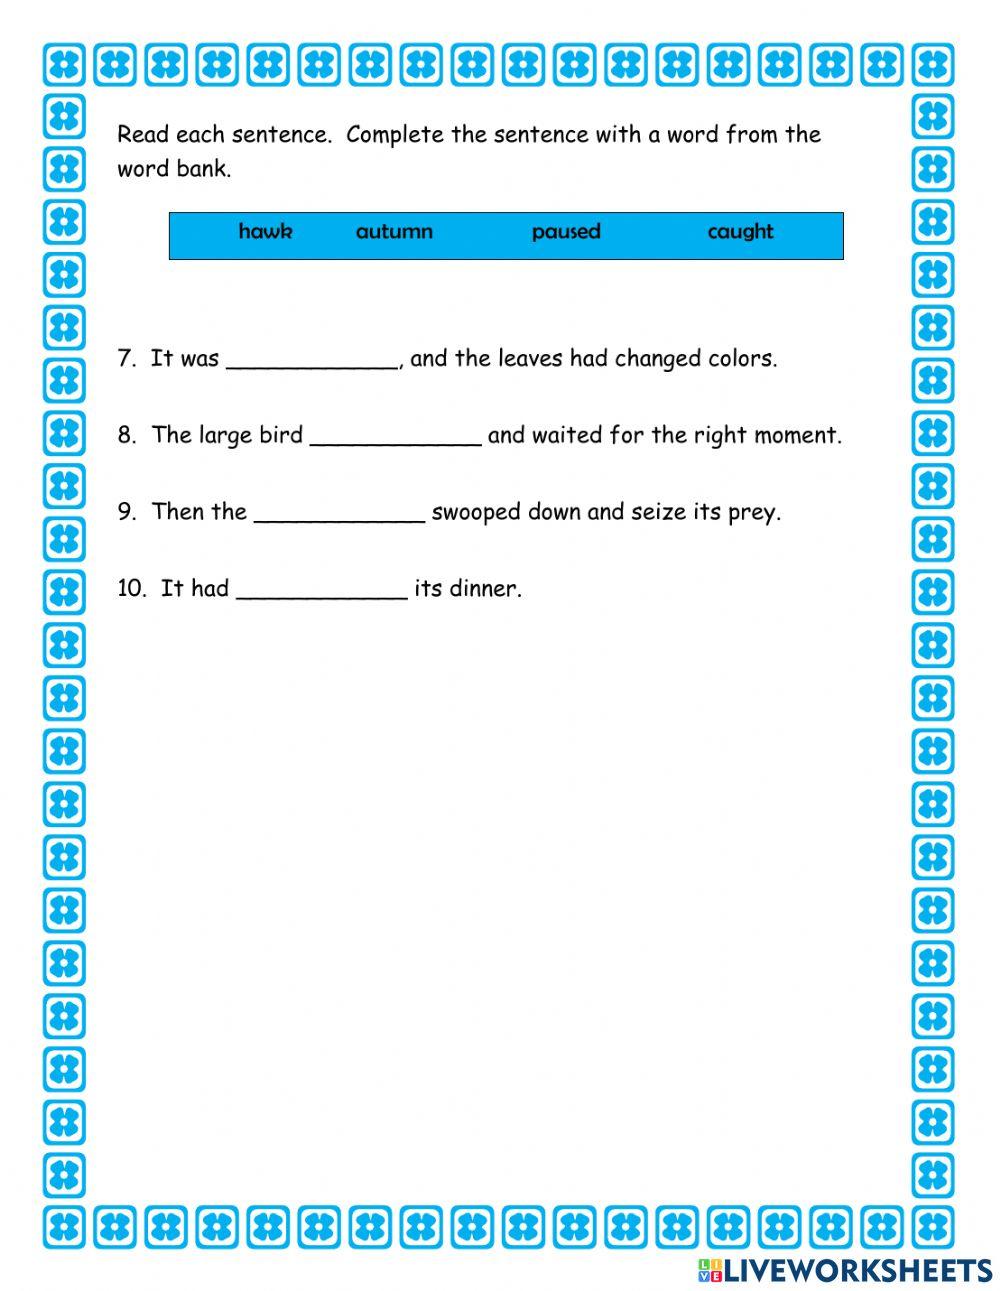 Vowel Digraphs au and aw